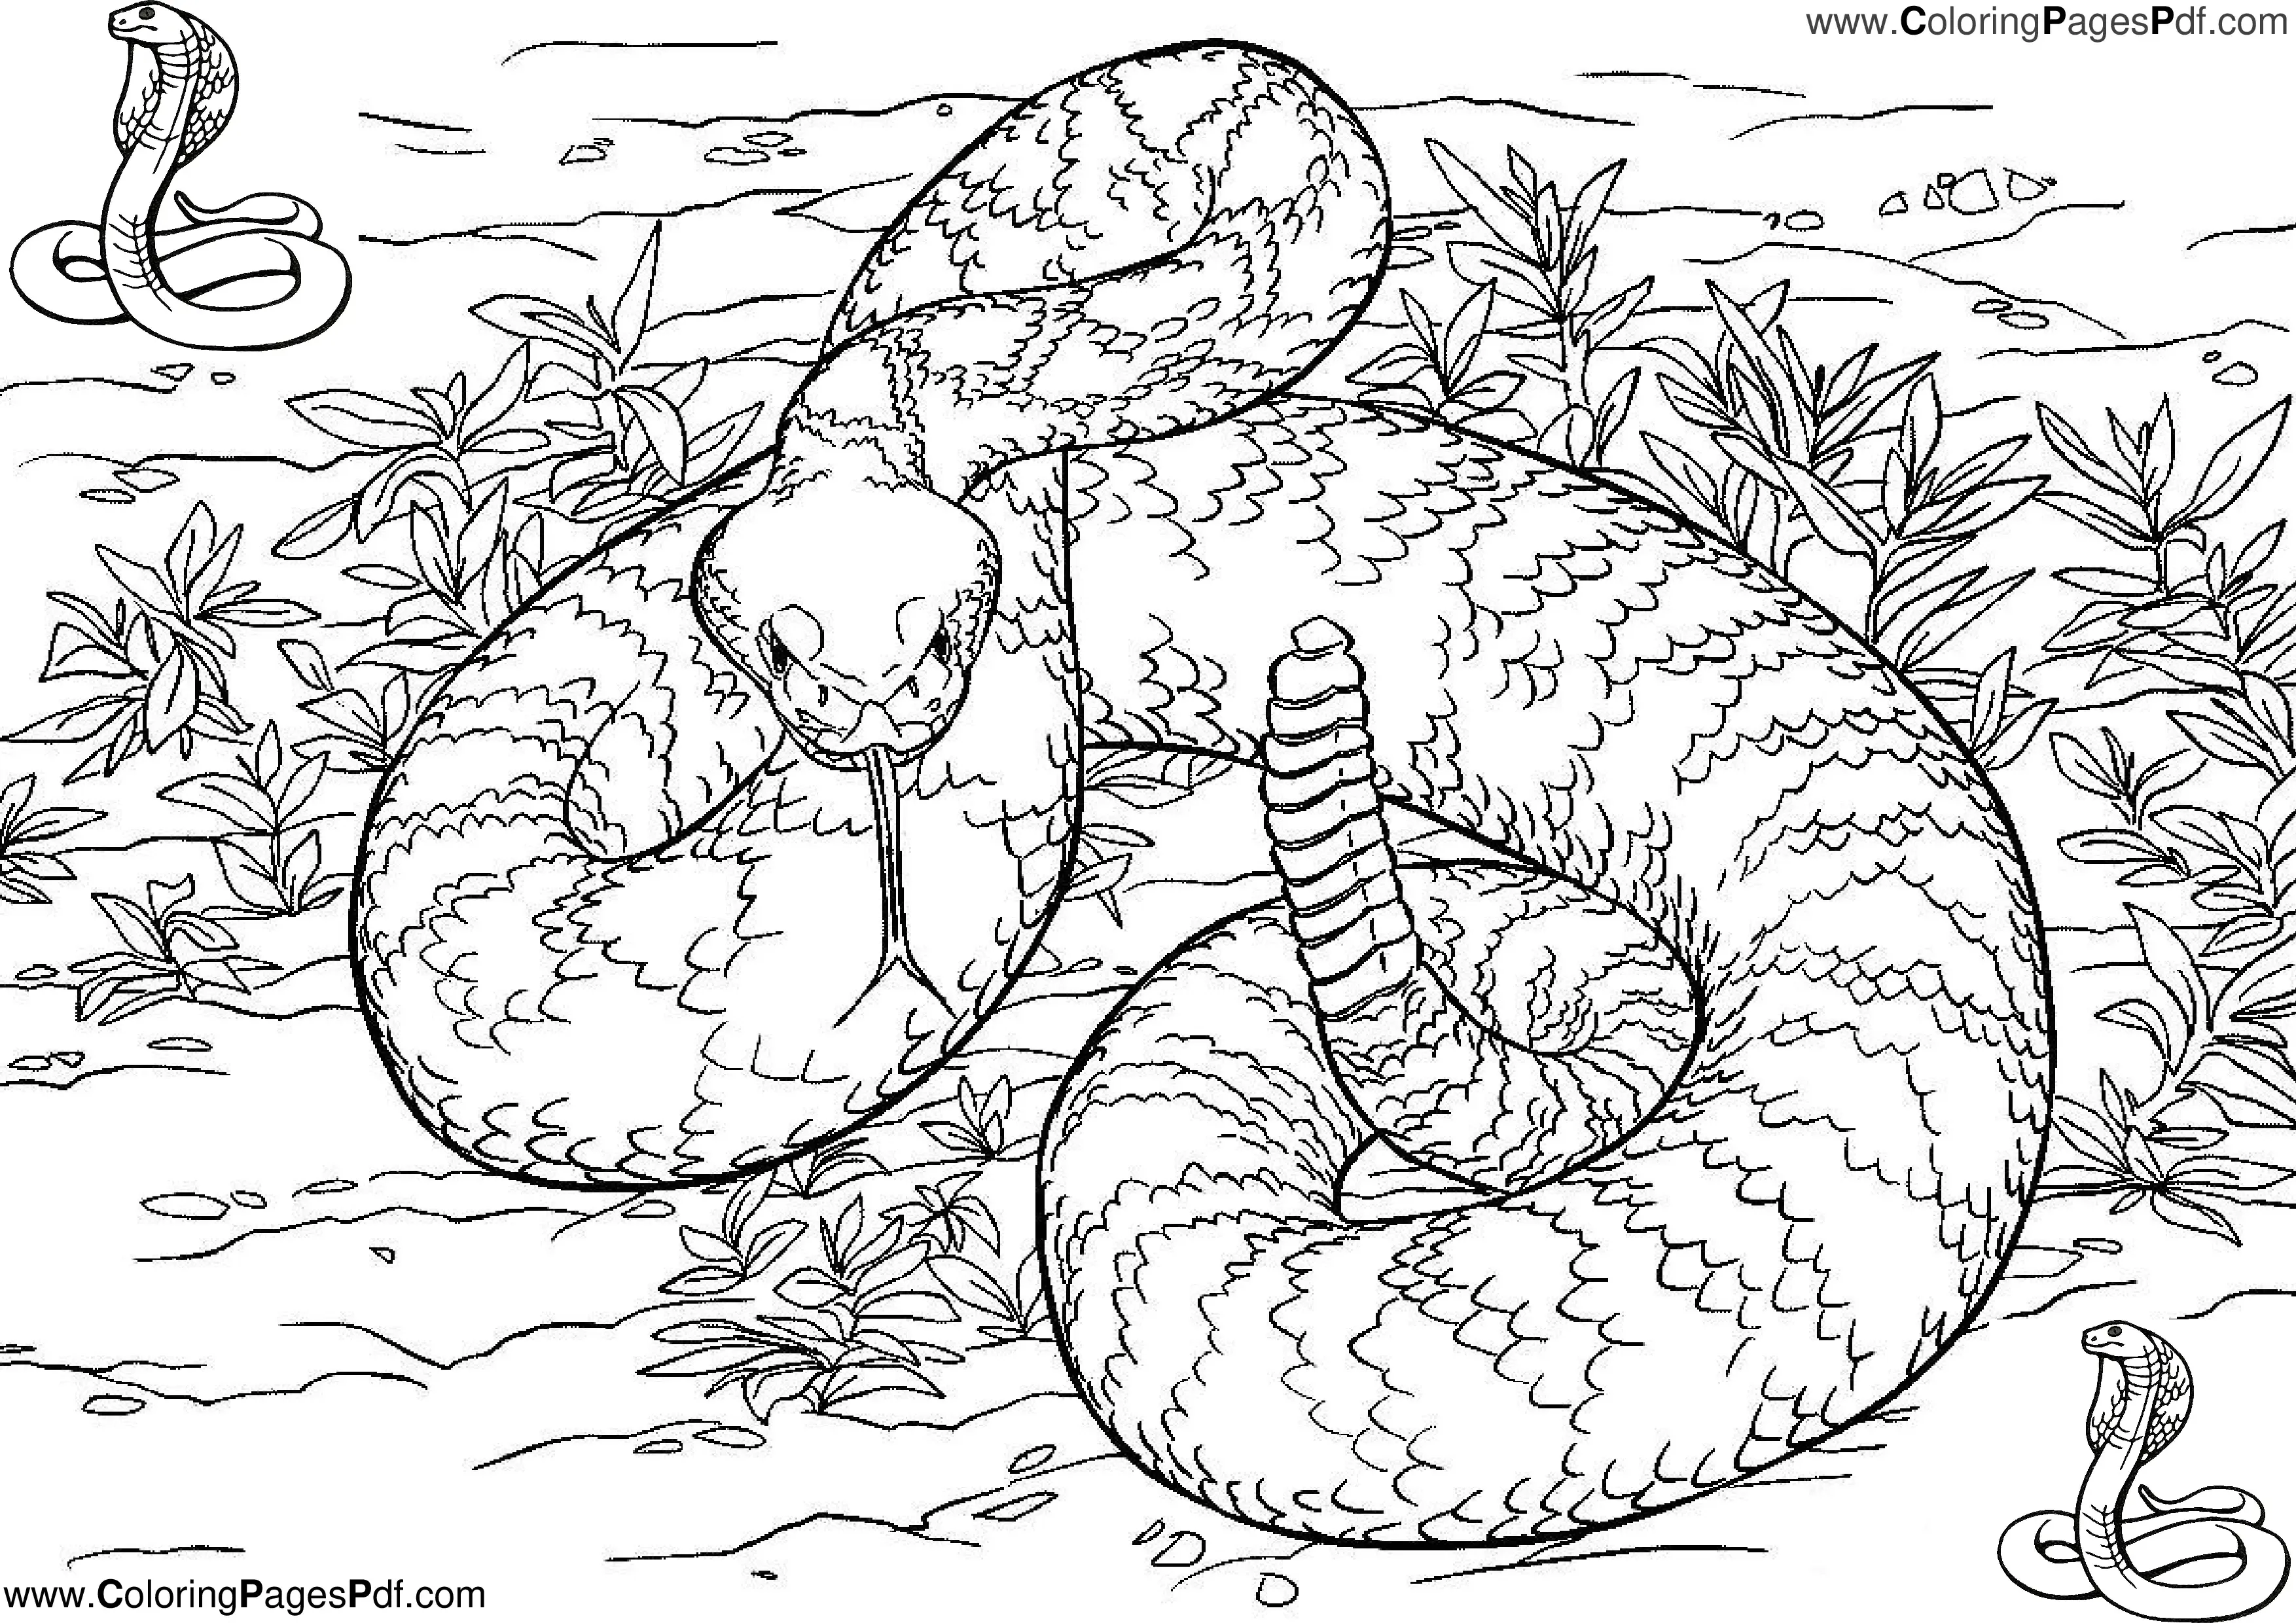 Snake coloring pages PDF